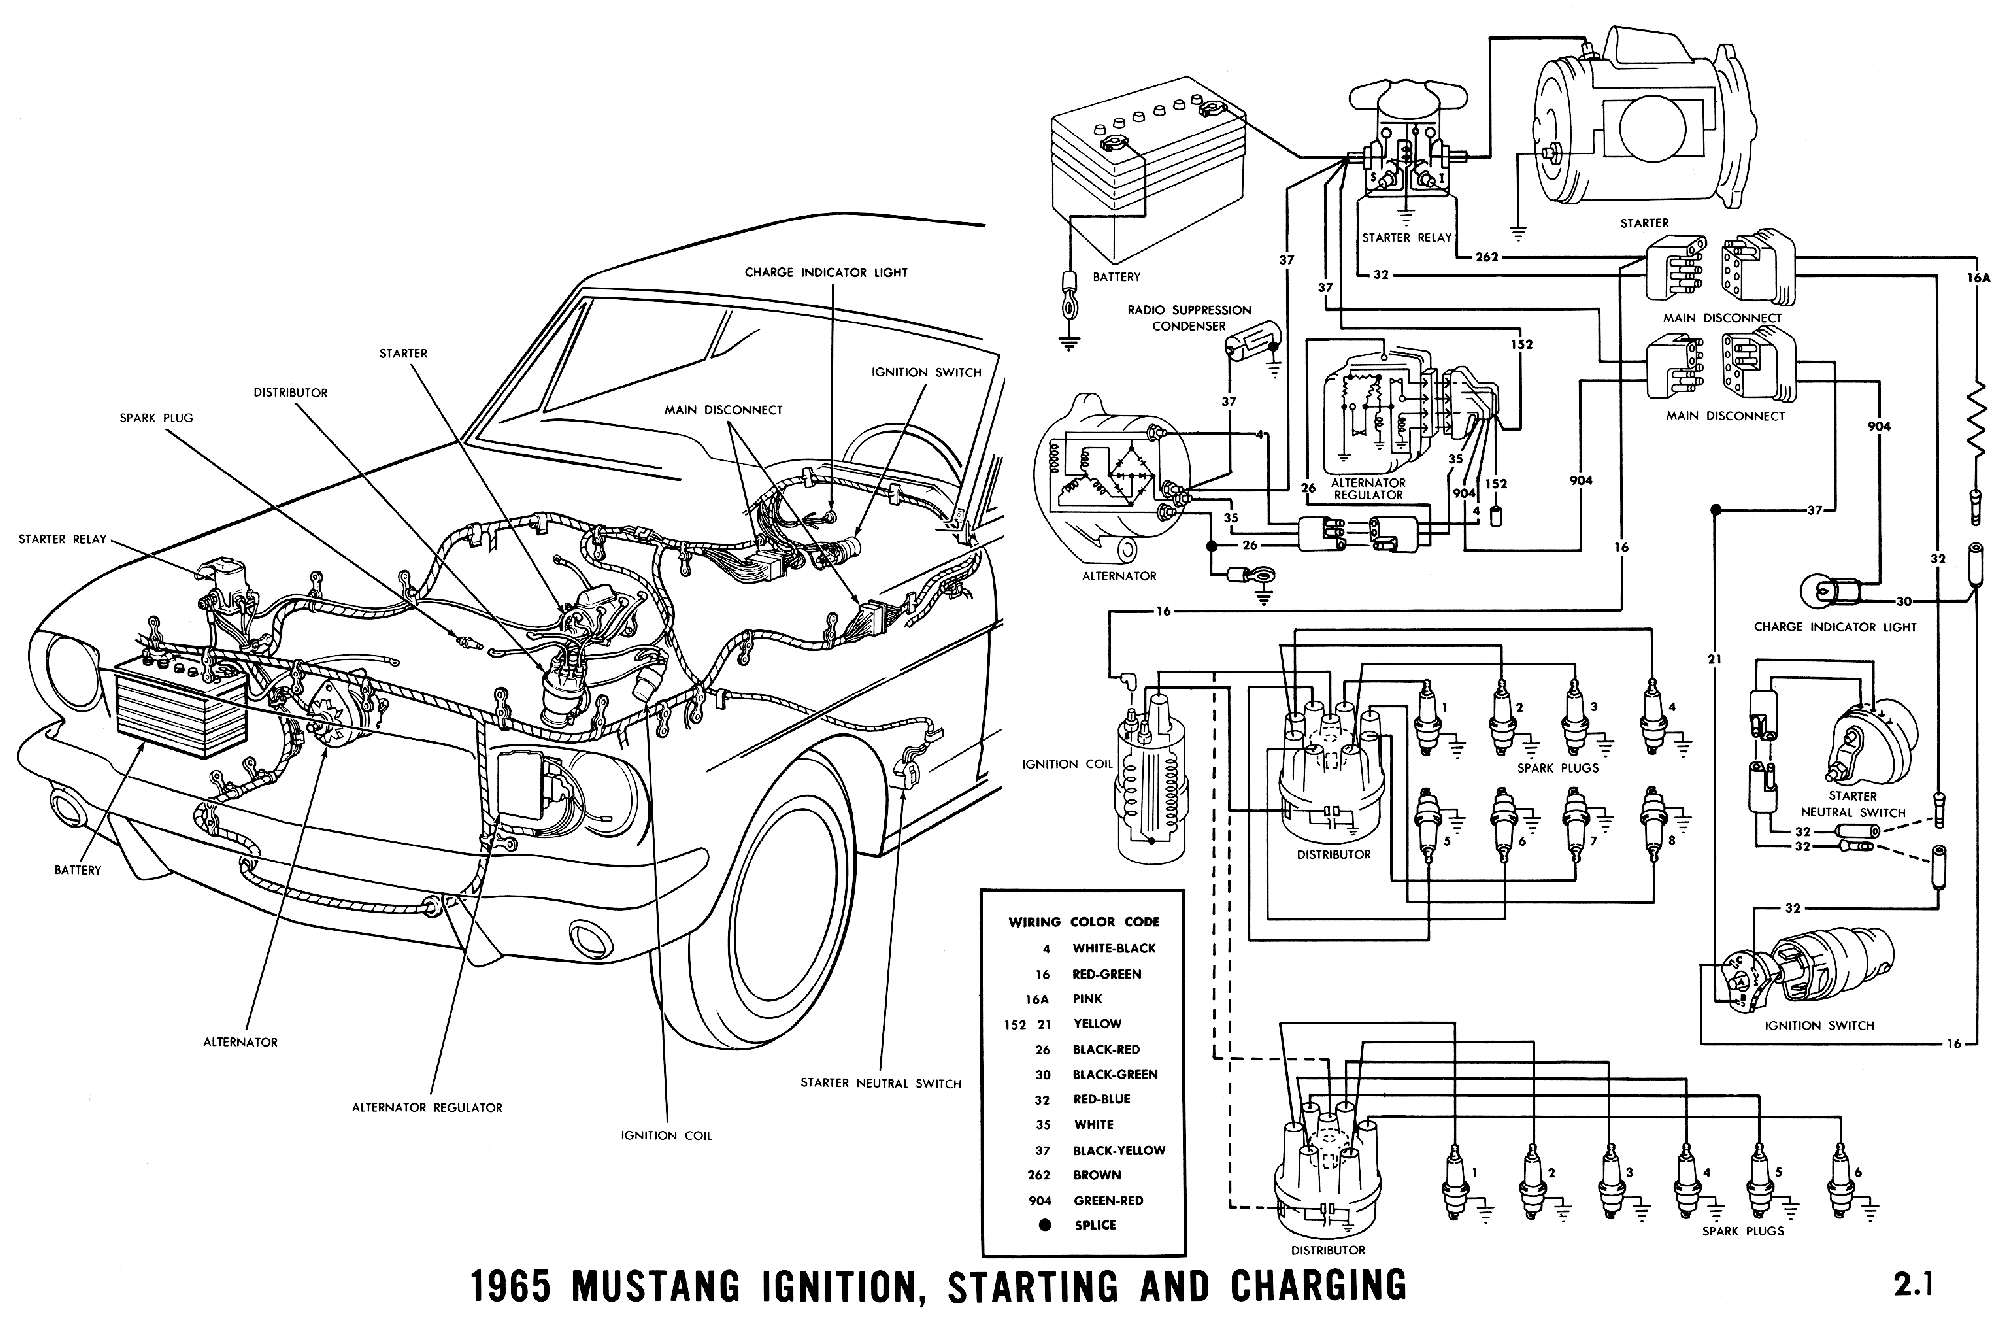 wiring diagram for 1965 sportster with a magneto and a battery for accessories